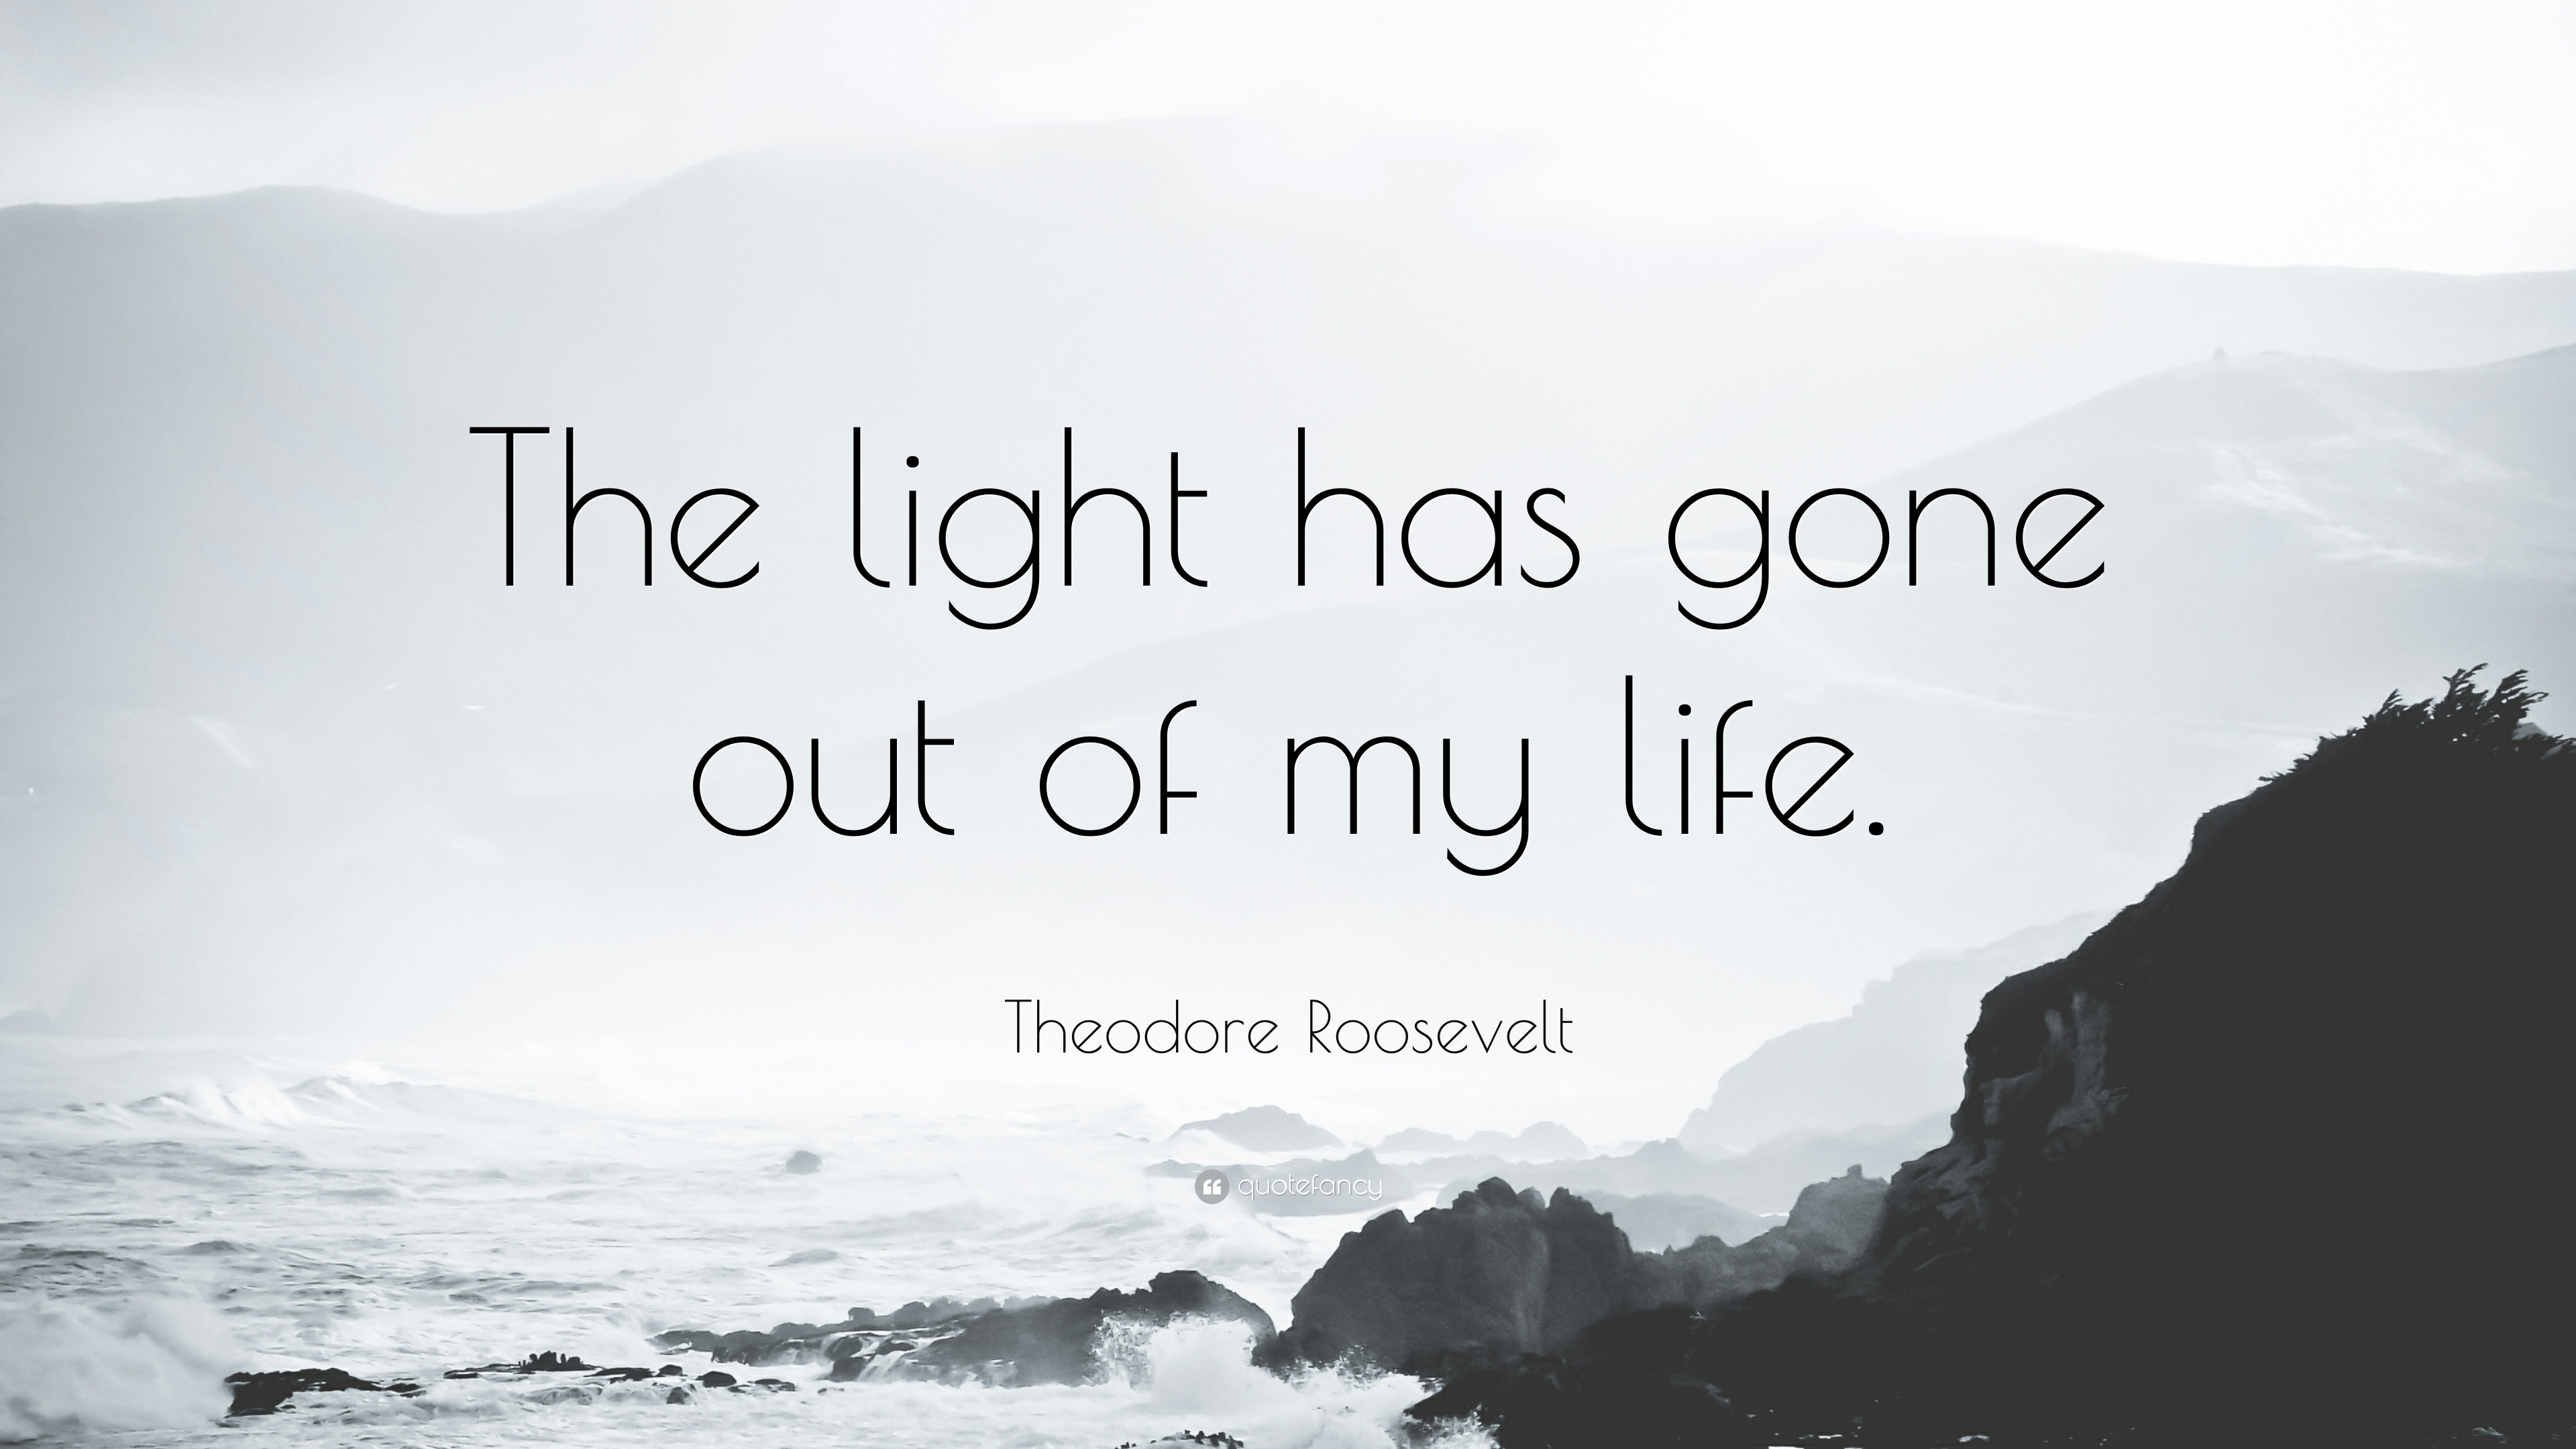 Theodore Roosevelt Quote: “The Light Has Gone Out Of My Life.”